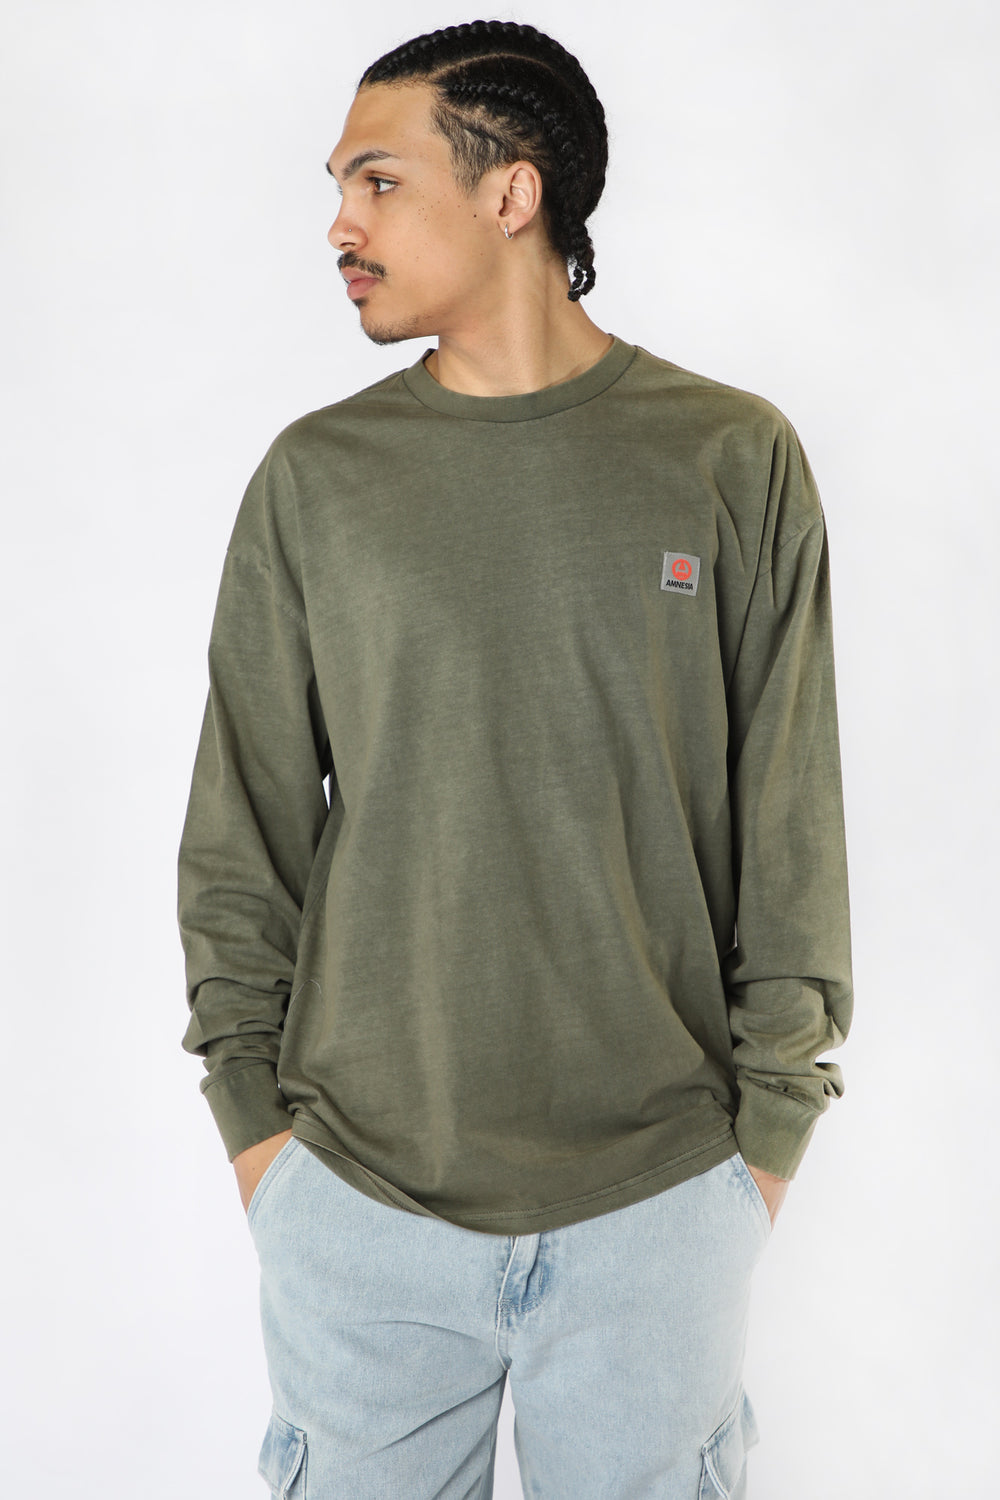 Amnesia Mens Pigment Washed Long Sleeve Top Dark Green